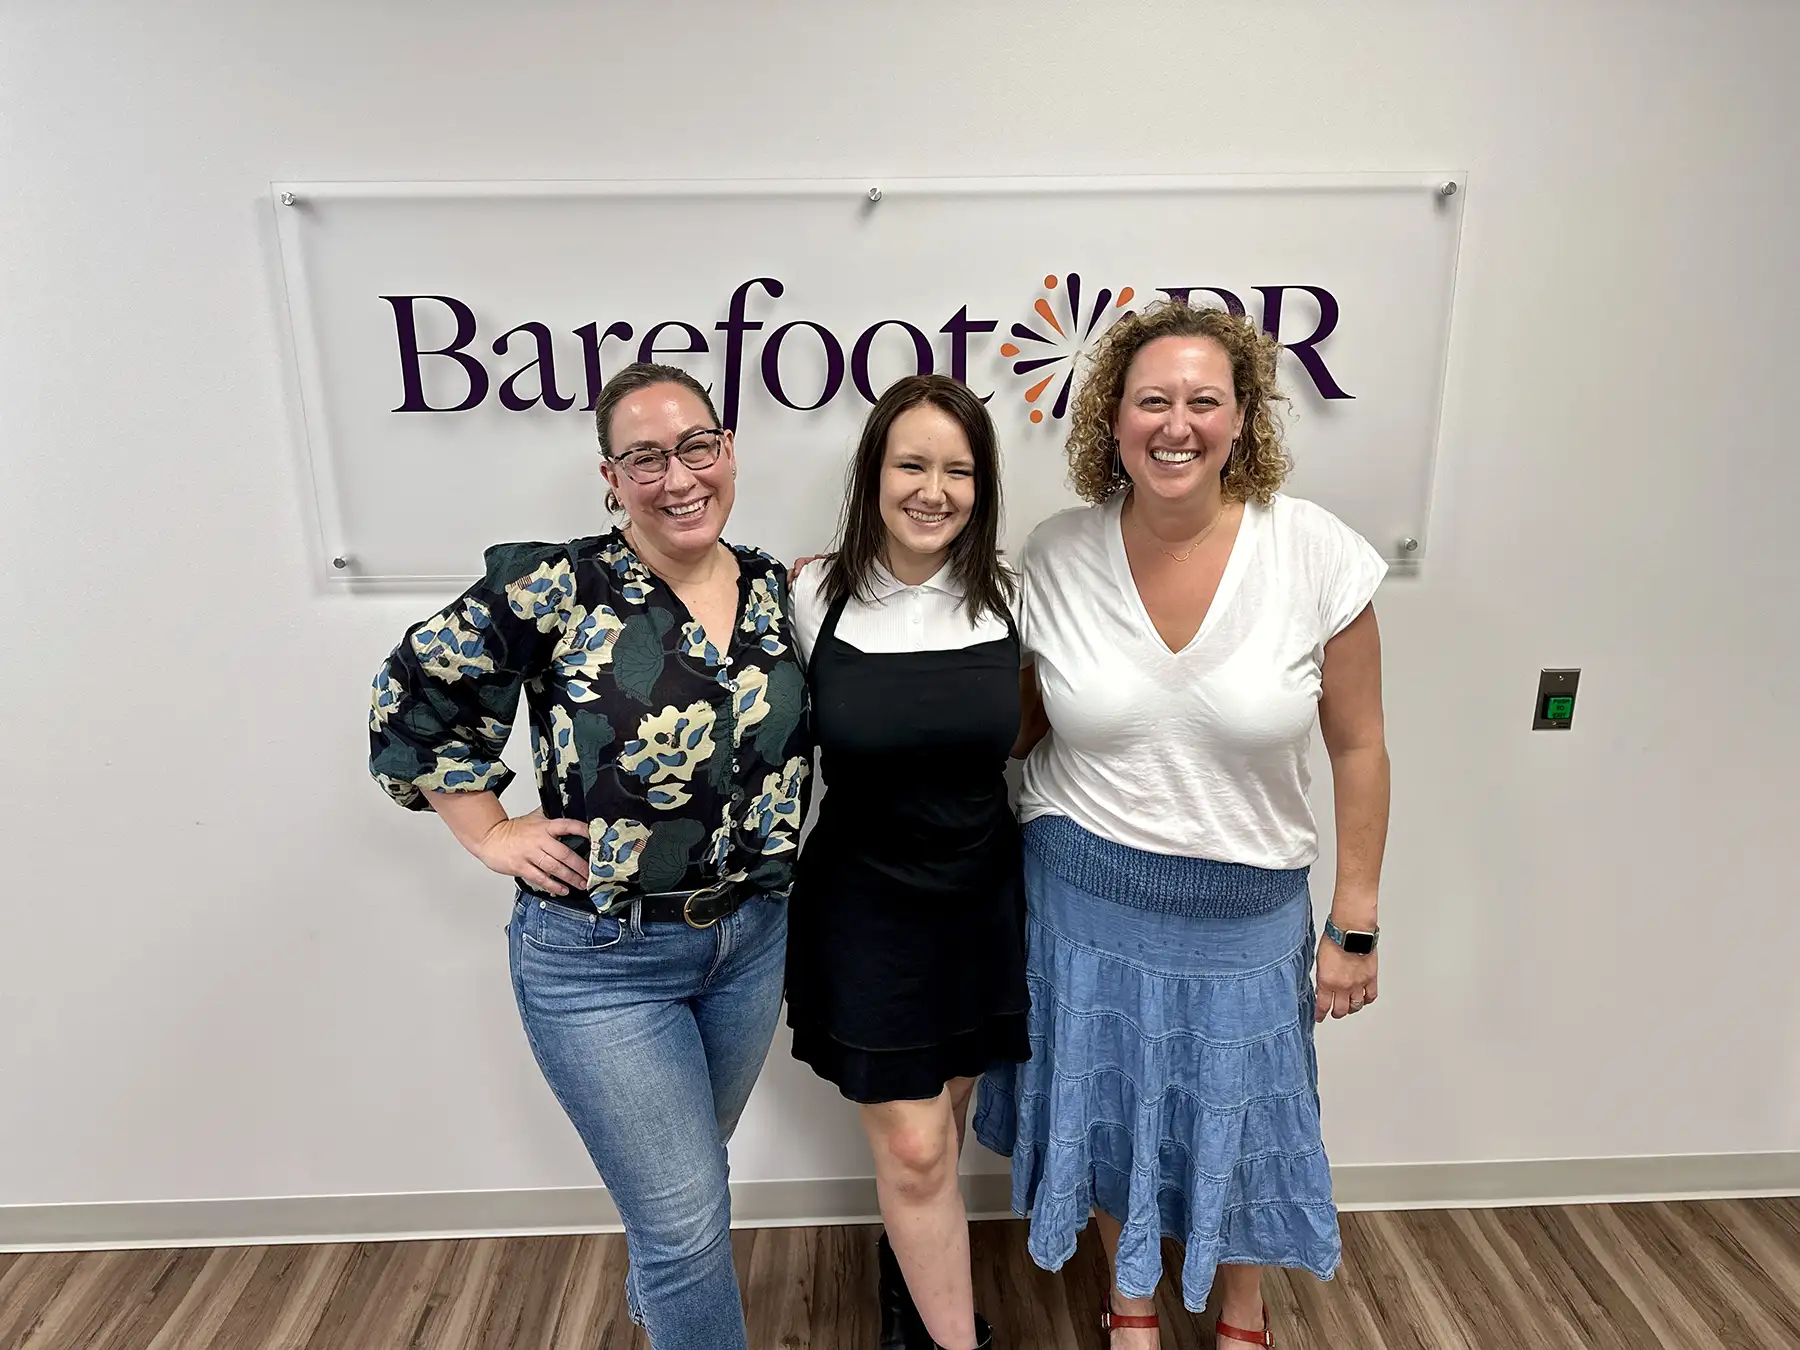 Kass with Cori and Sarah in front of the Barefoot PR sign in the office.